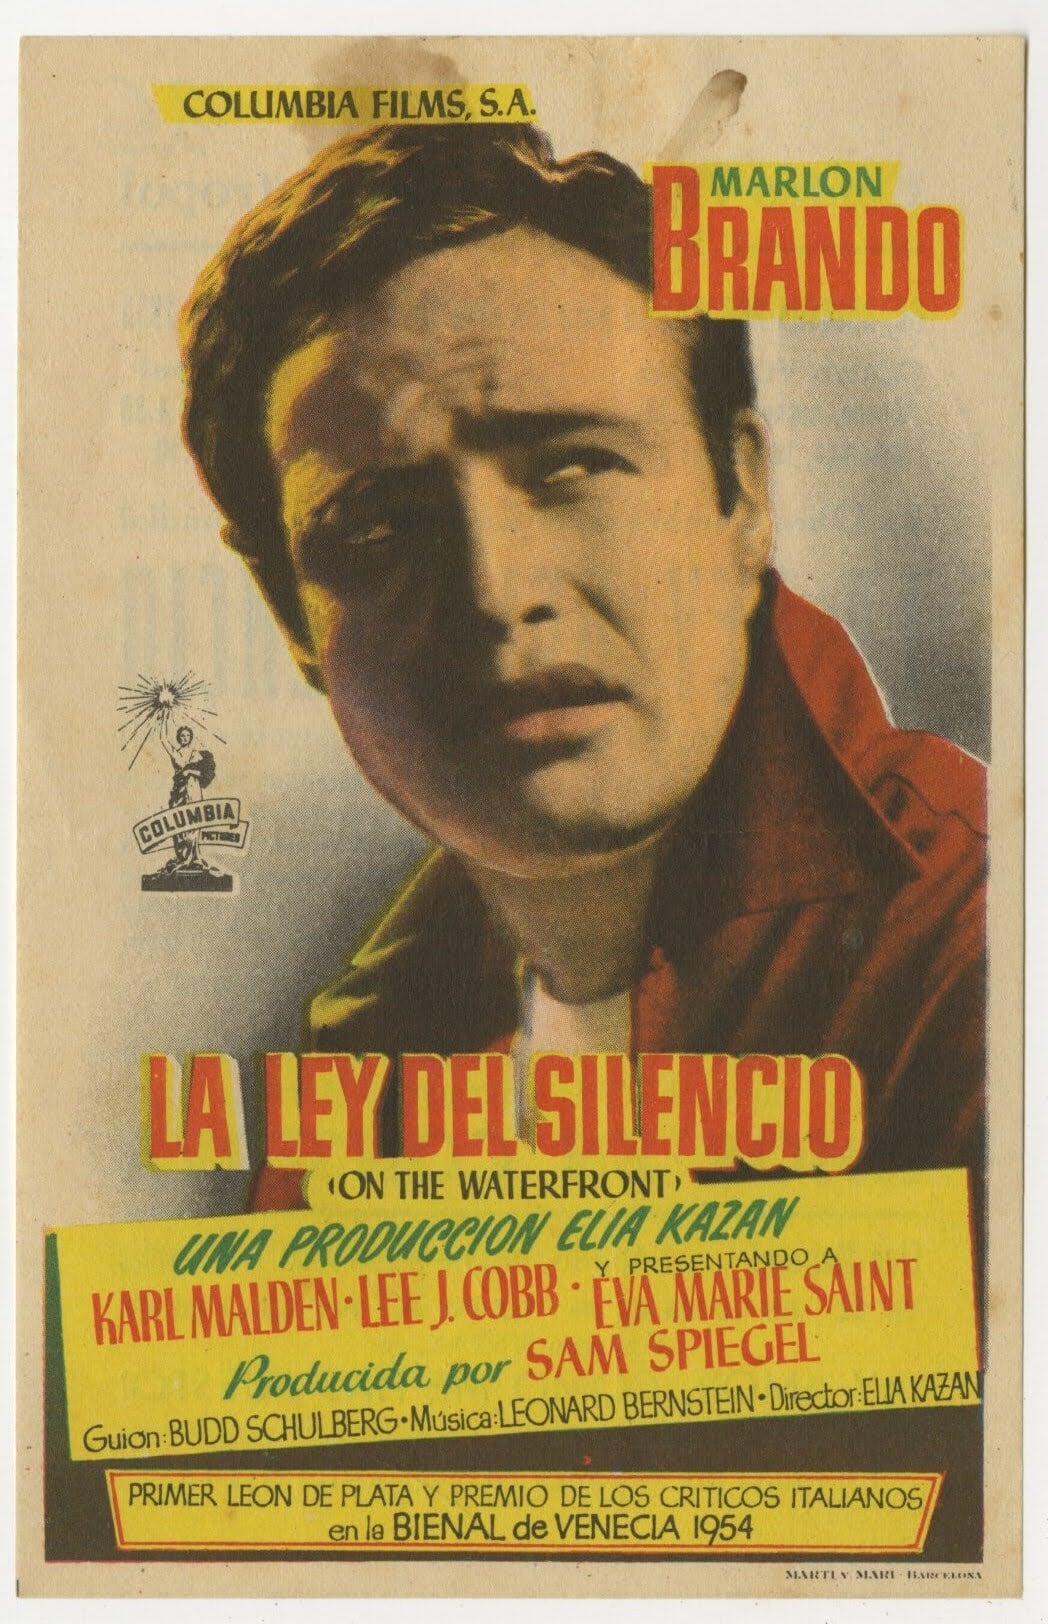 On The Waterfront Spanish Herald (R 1955) - posterpalace.com